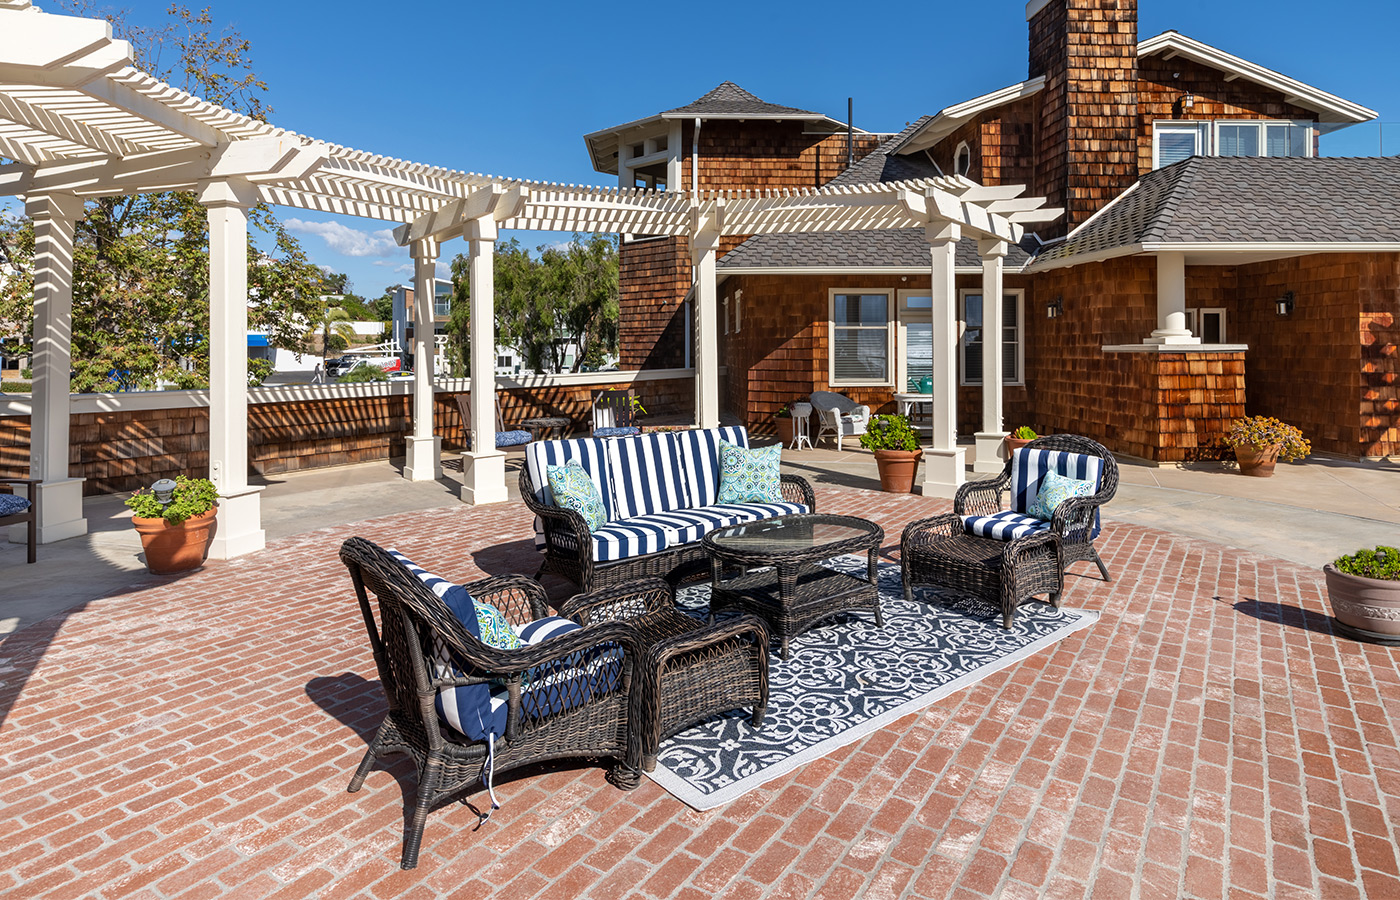 Furniture and navy blue rug on the patio at Crown Cove.